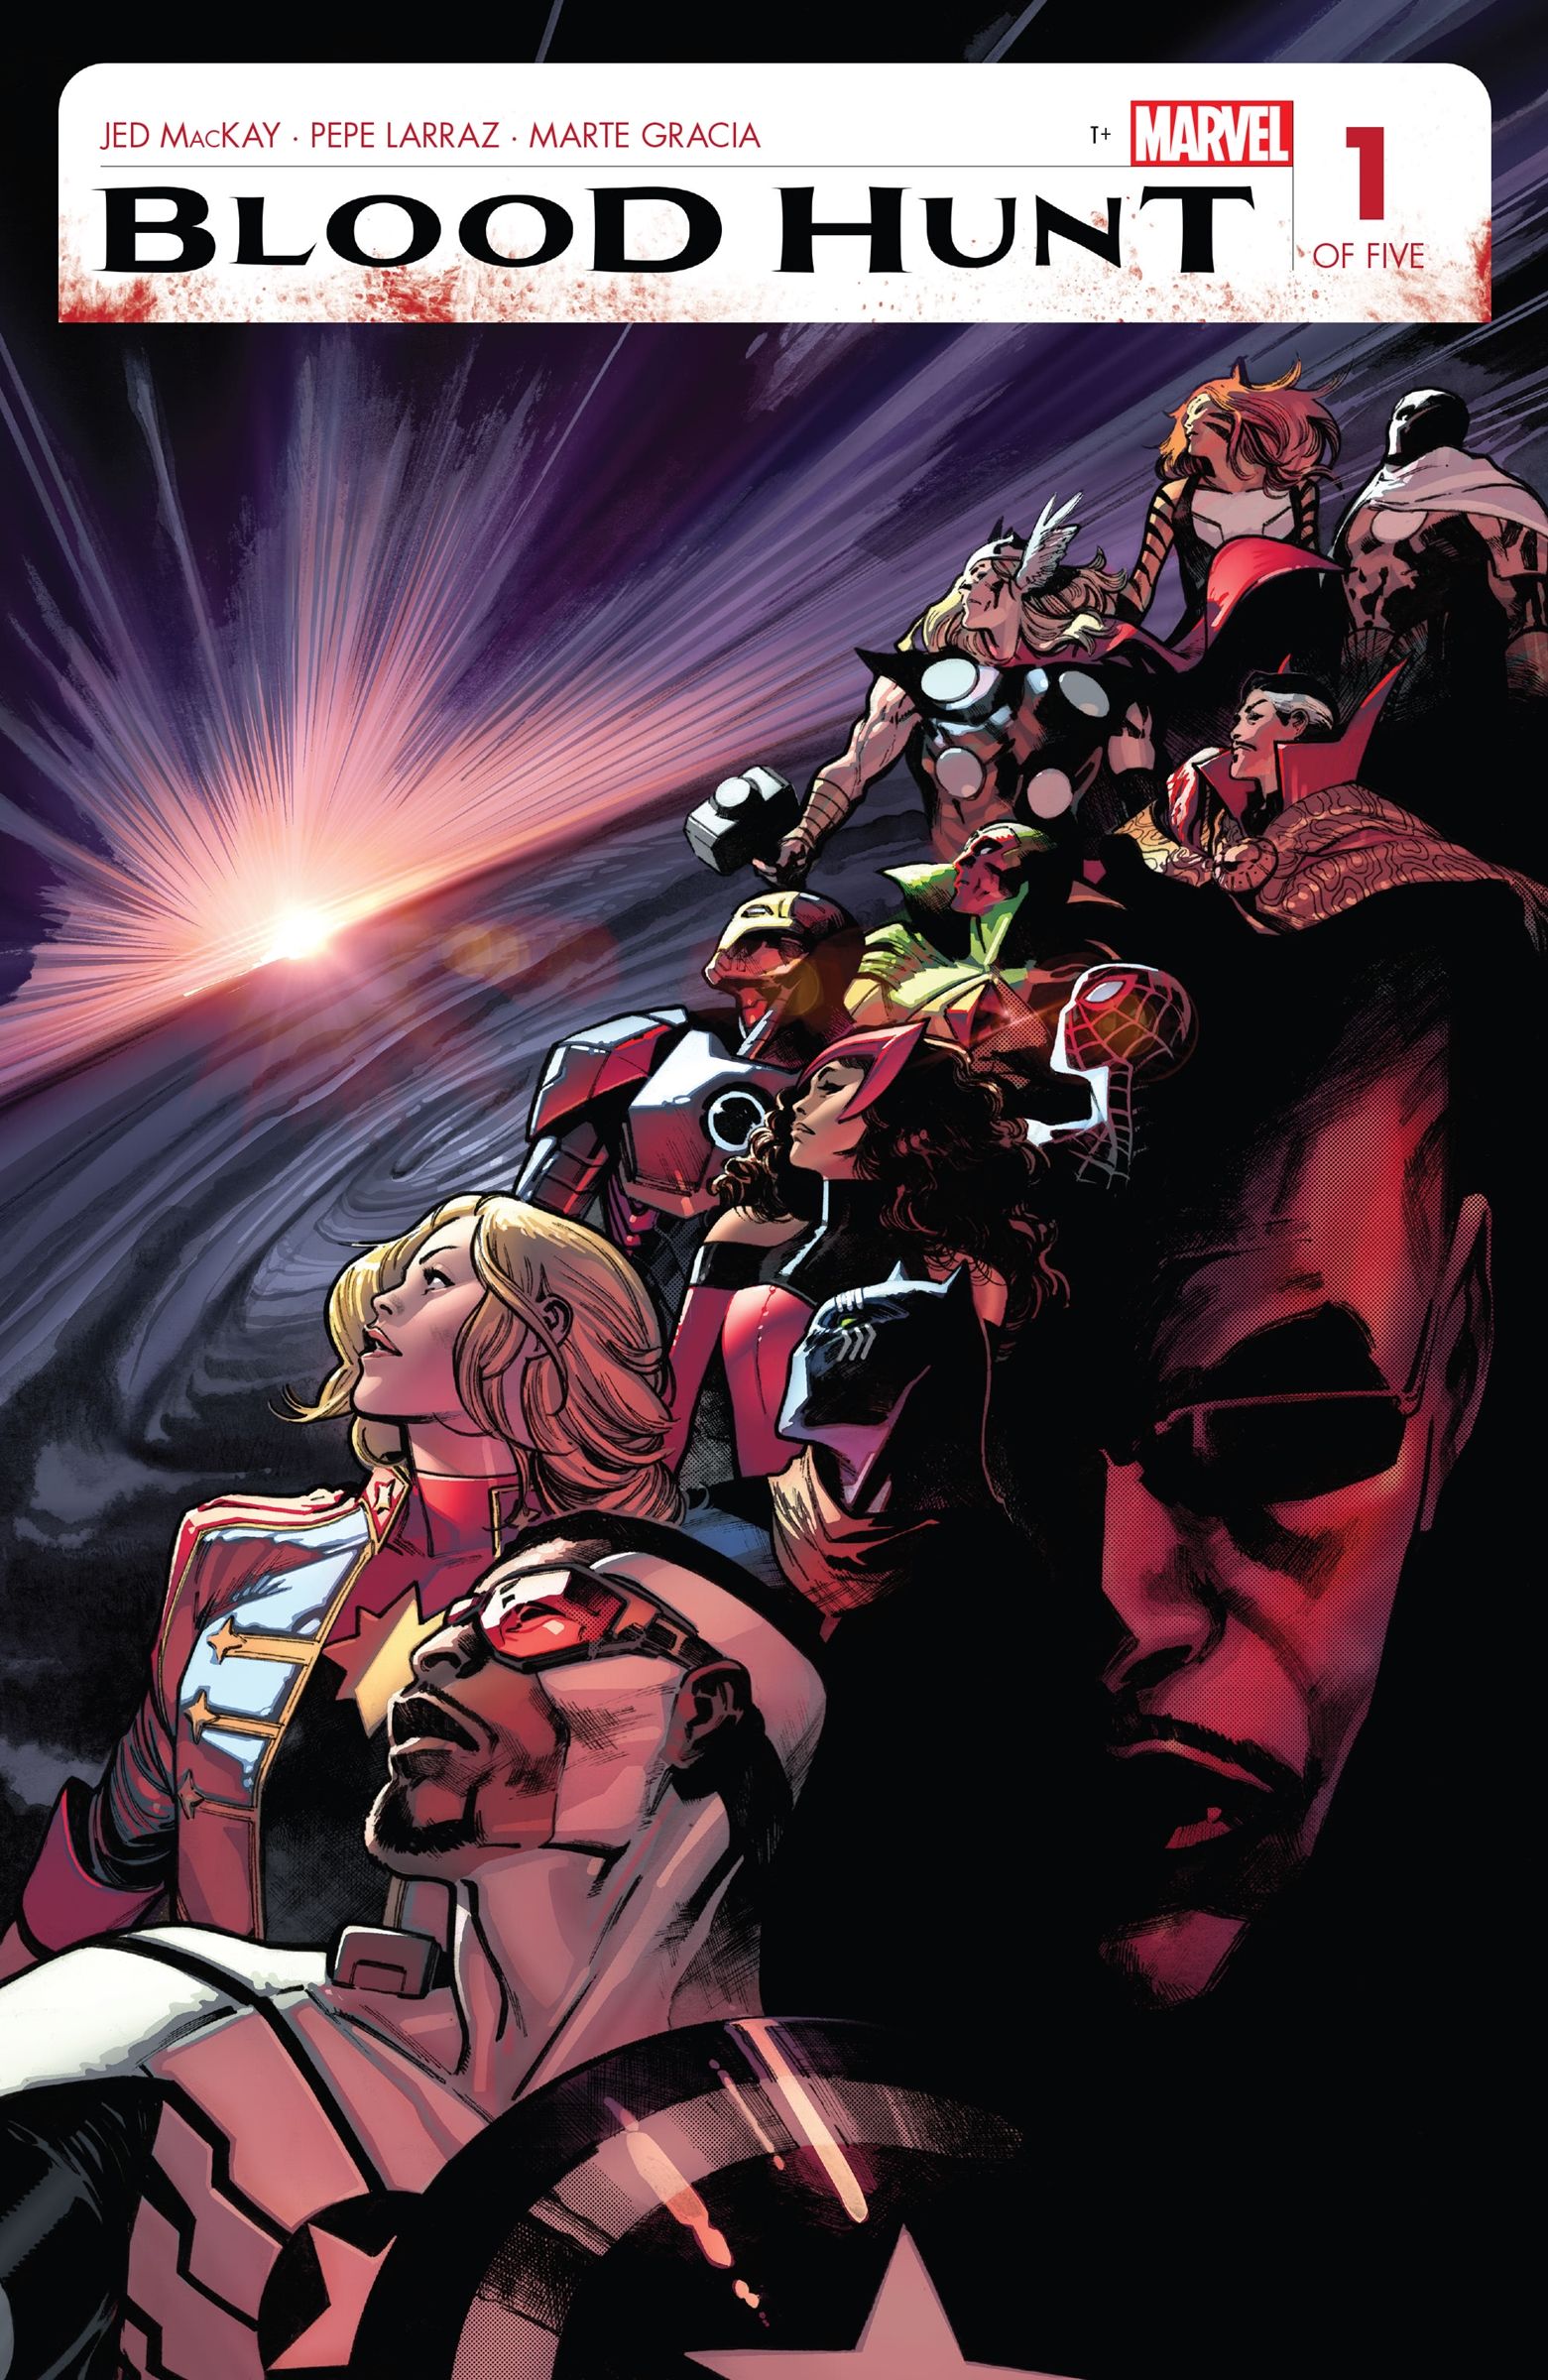 (left) The Avengers stand in a lineup. (right) The shadowy figure of Blade looks ahead. 